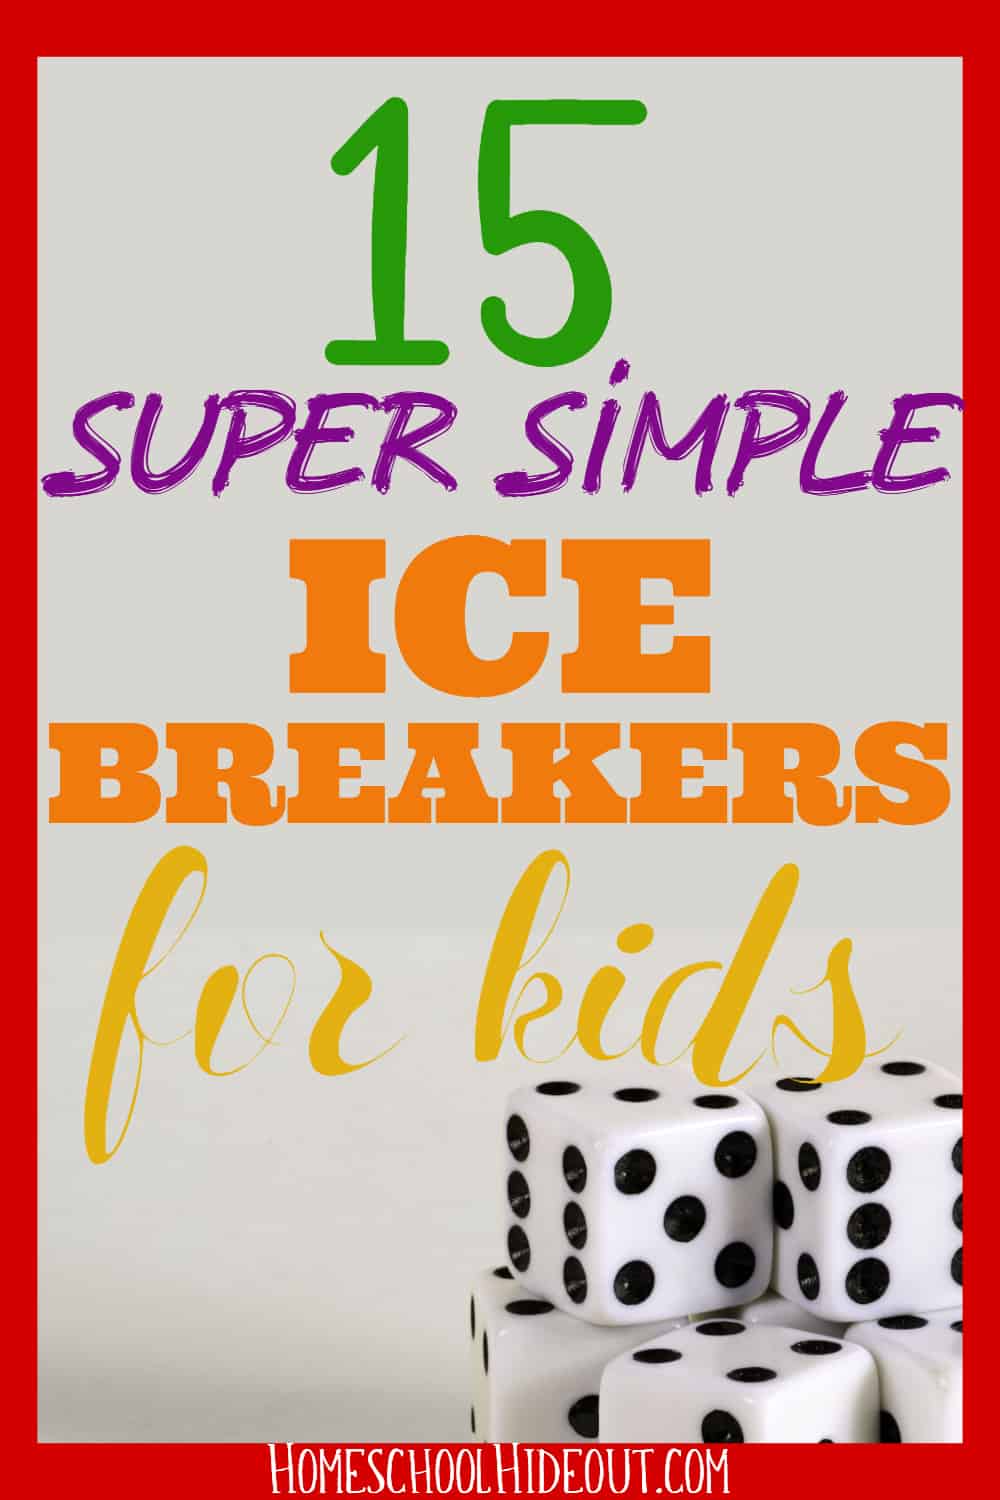 Ice Breakers for Kids with FREE Printables - Homeschool Hideout